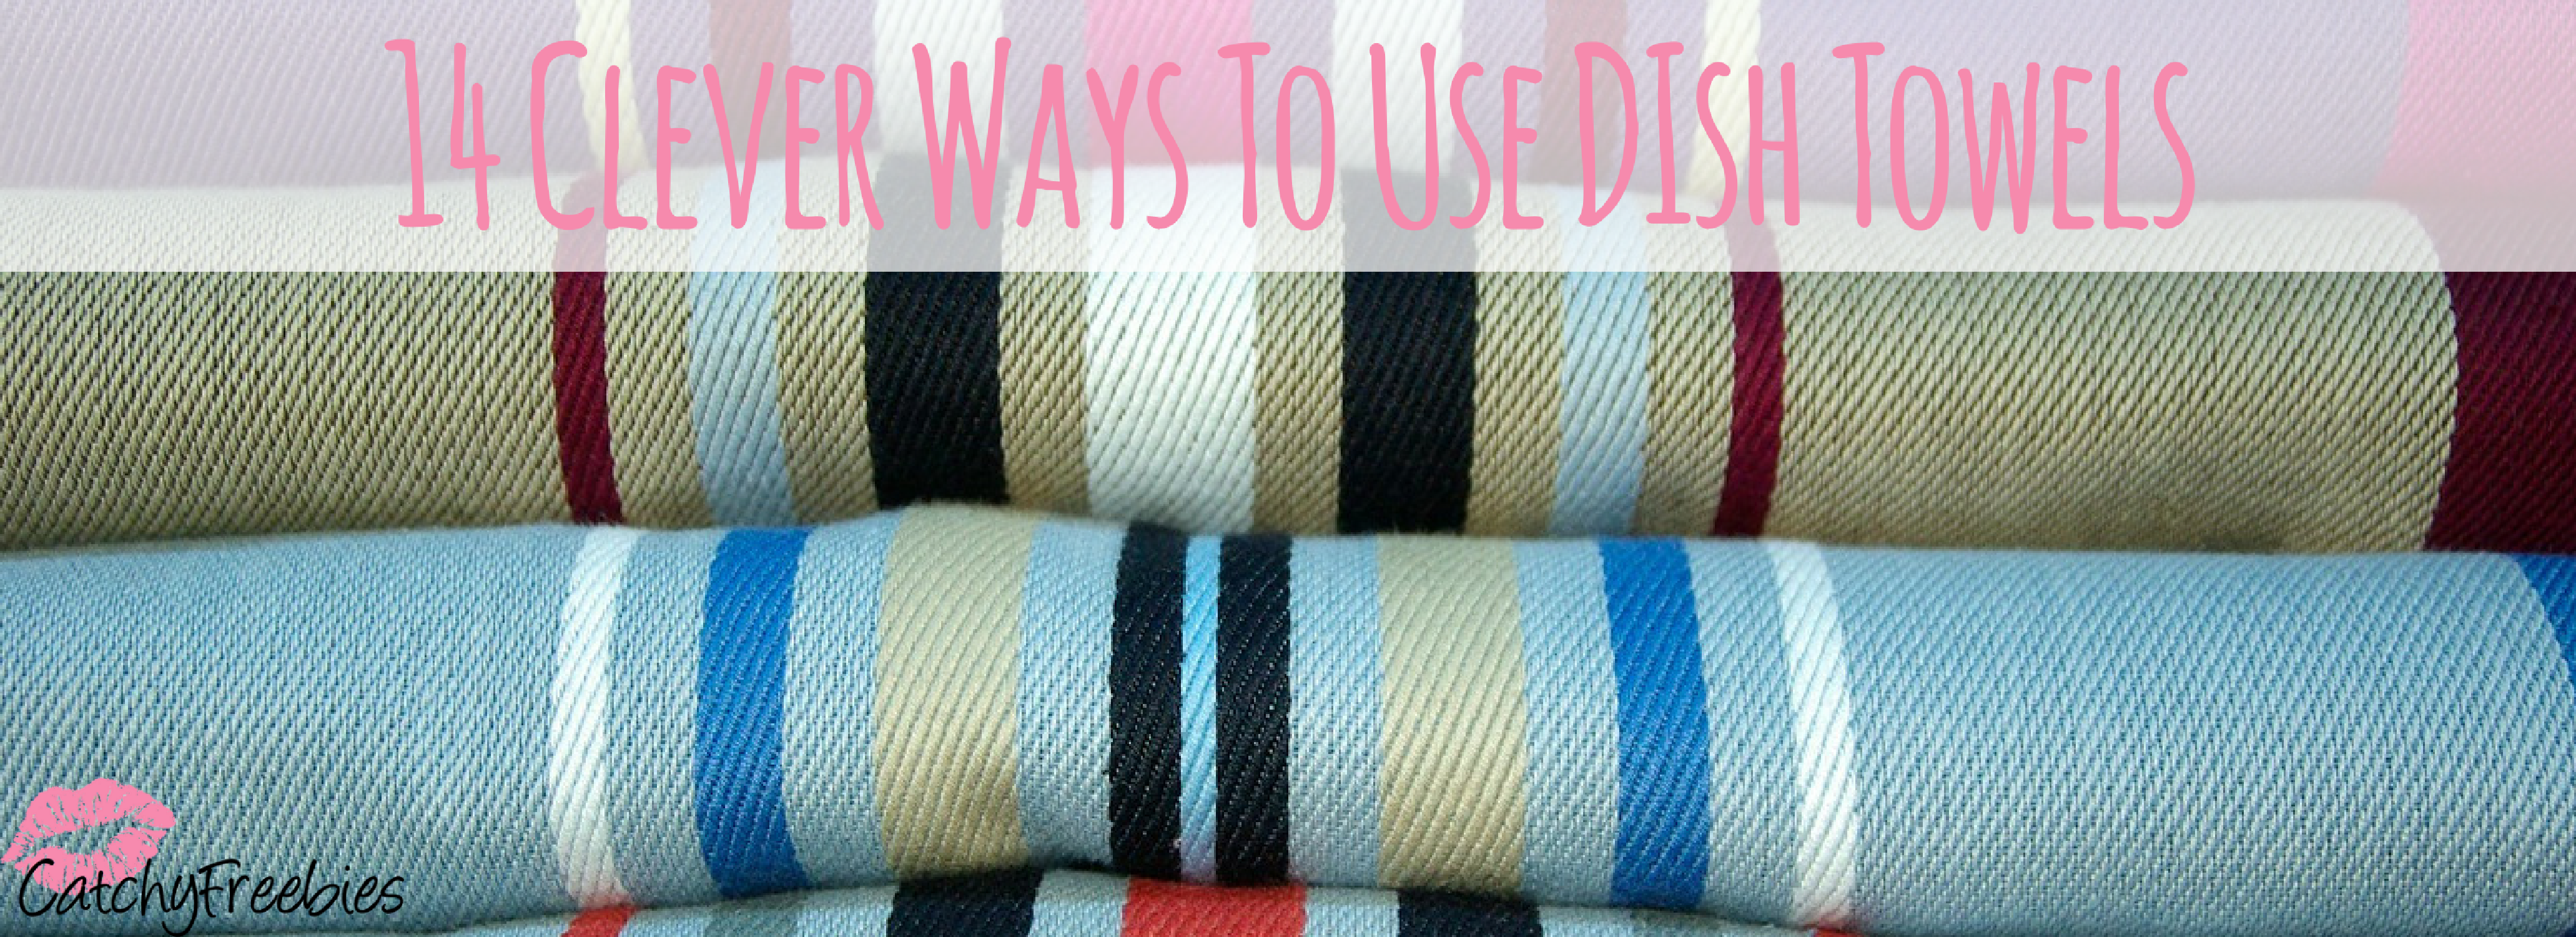 14 Clever Ways To Use Dish Towels -CatchyFreebies